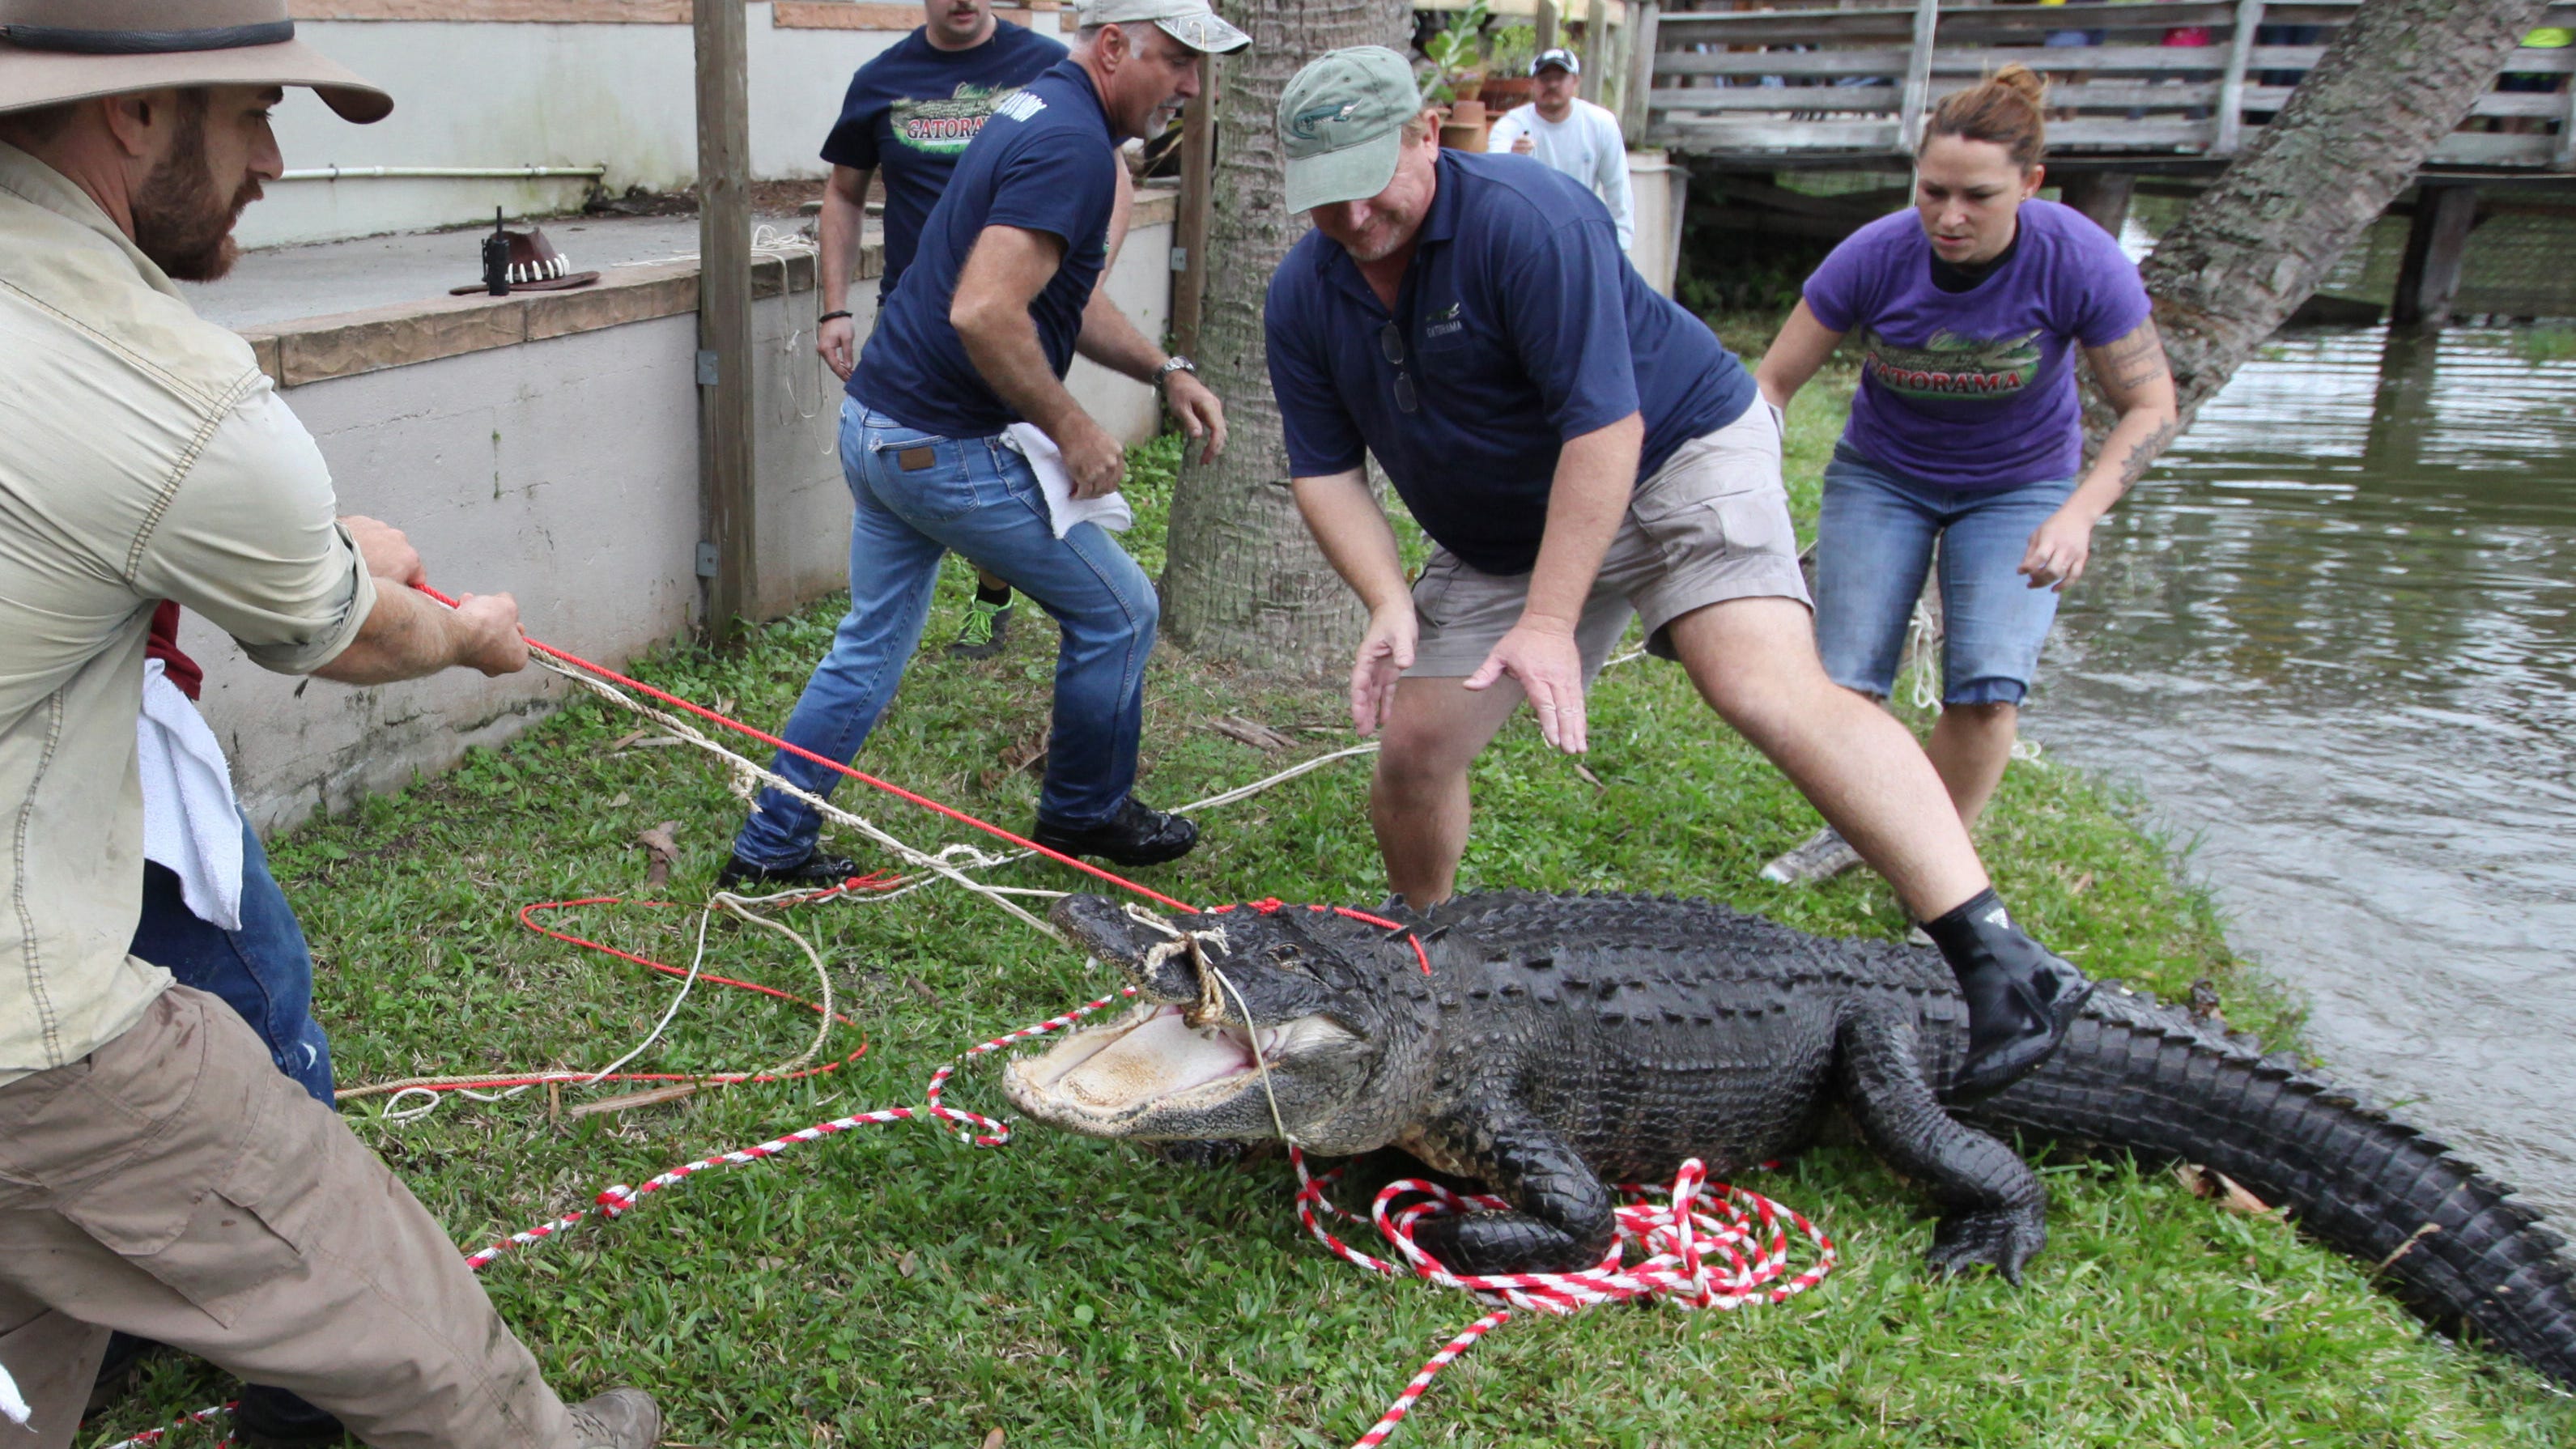 It's all in the name of gator love at Gatorama